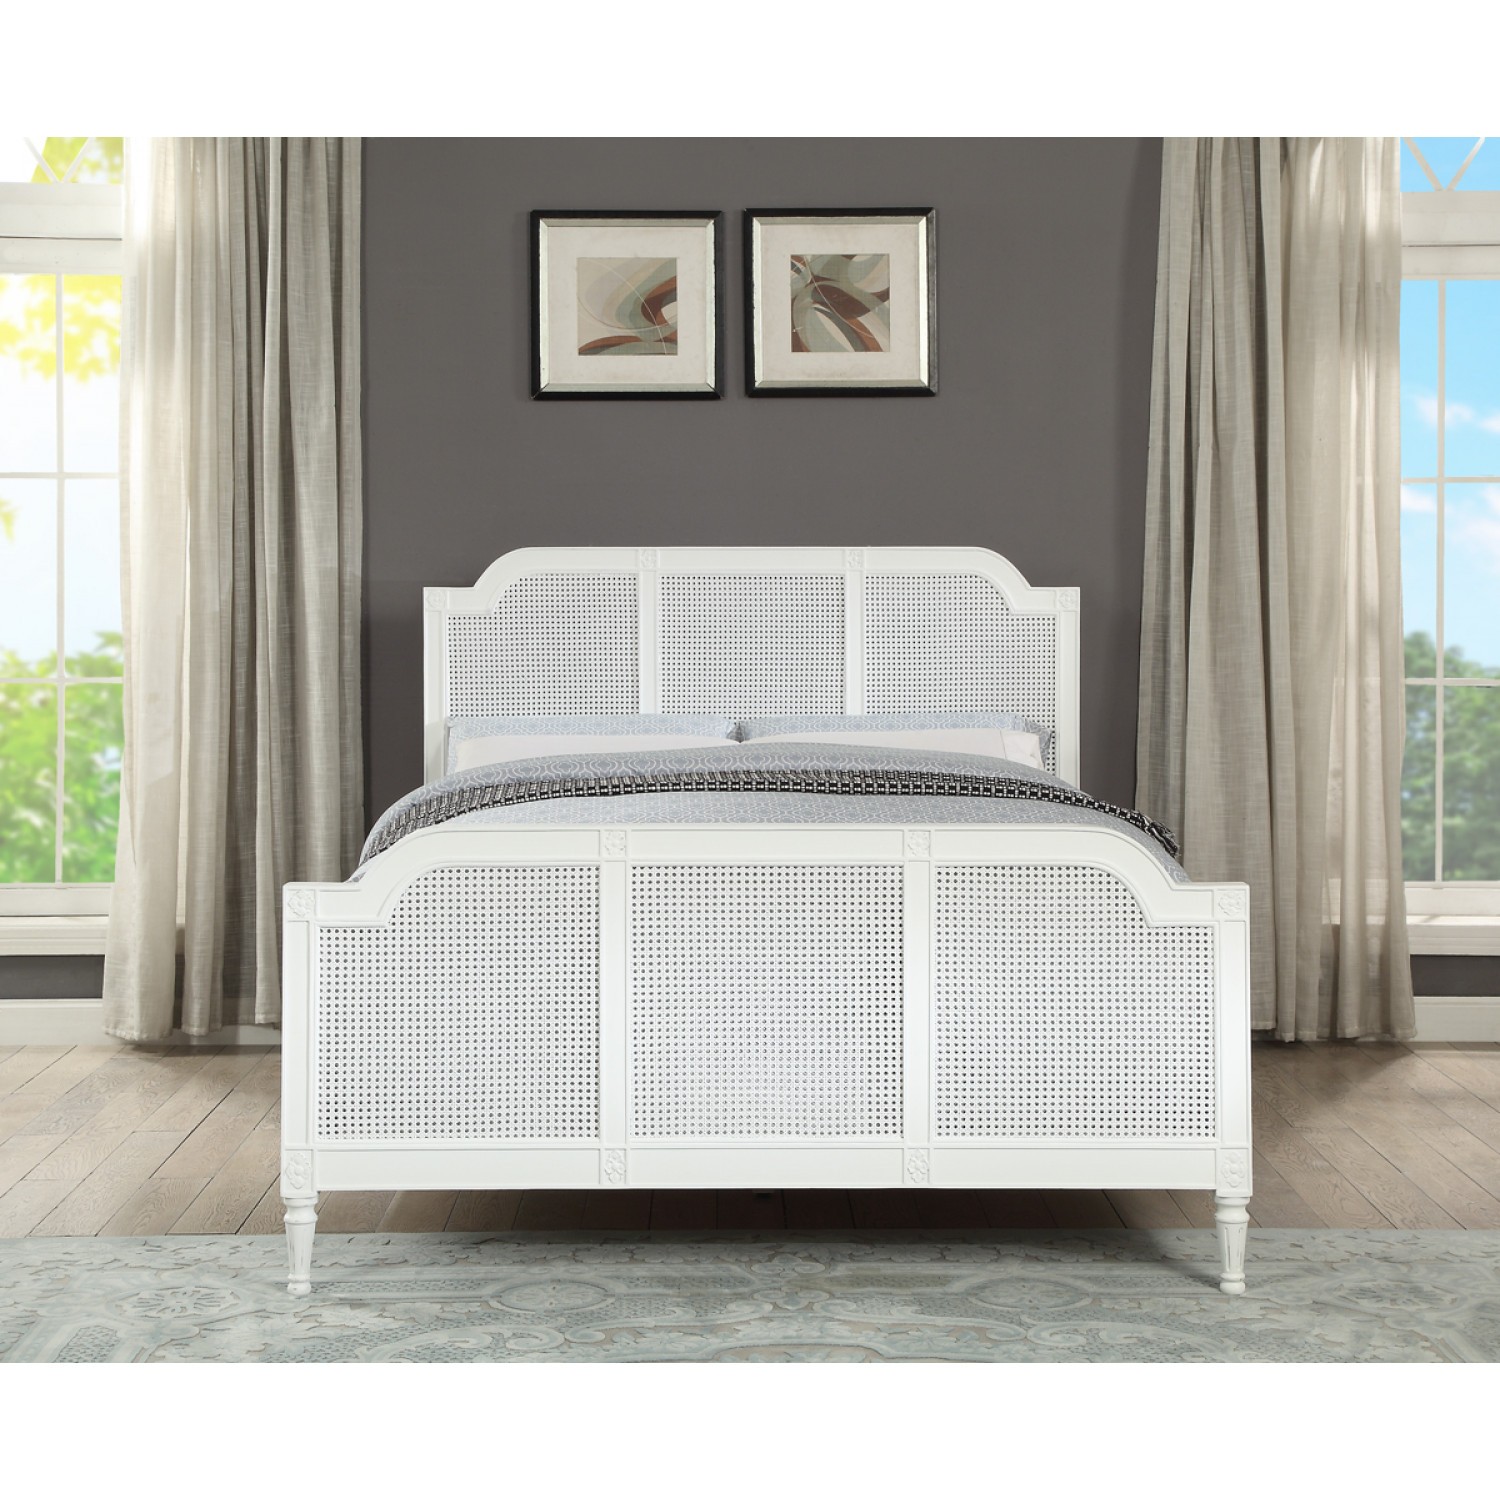 Seabreeze queen bed french style white distressed finish 1